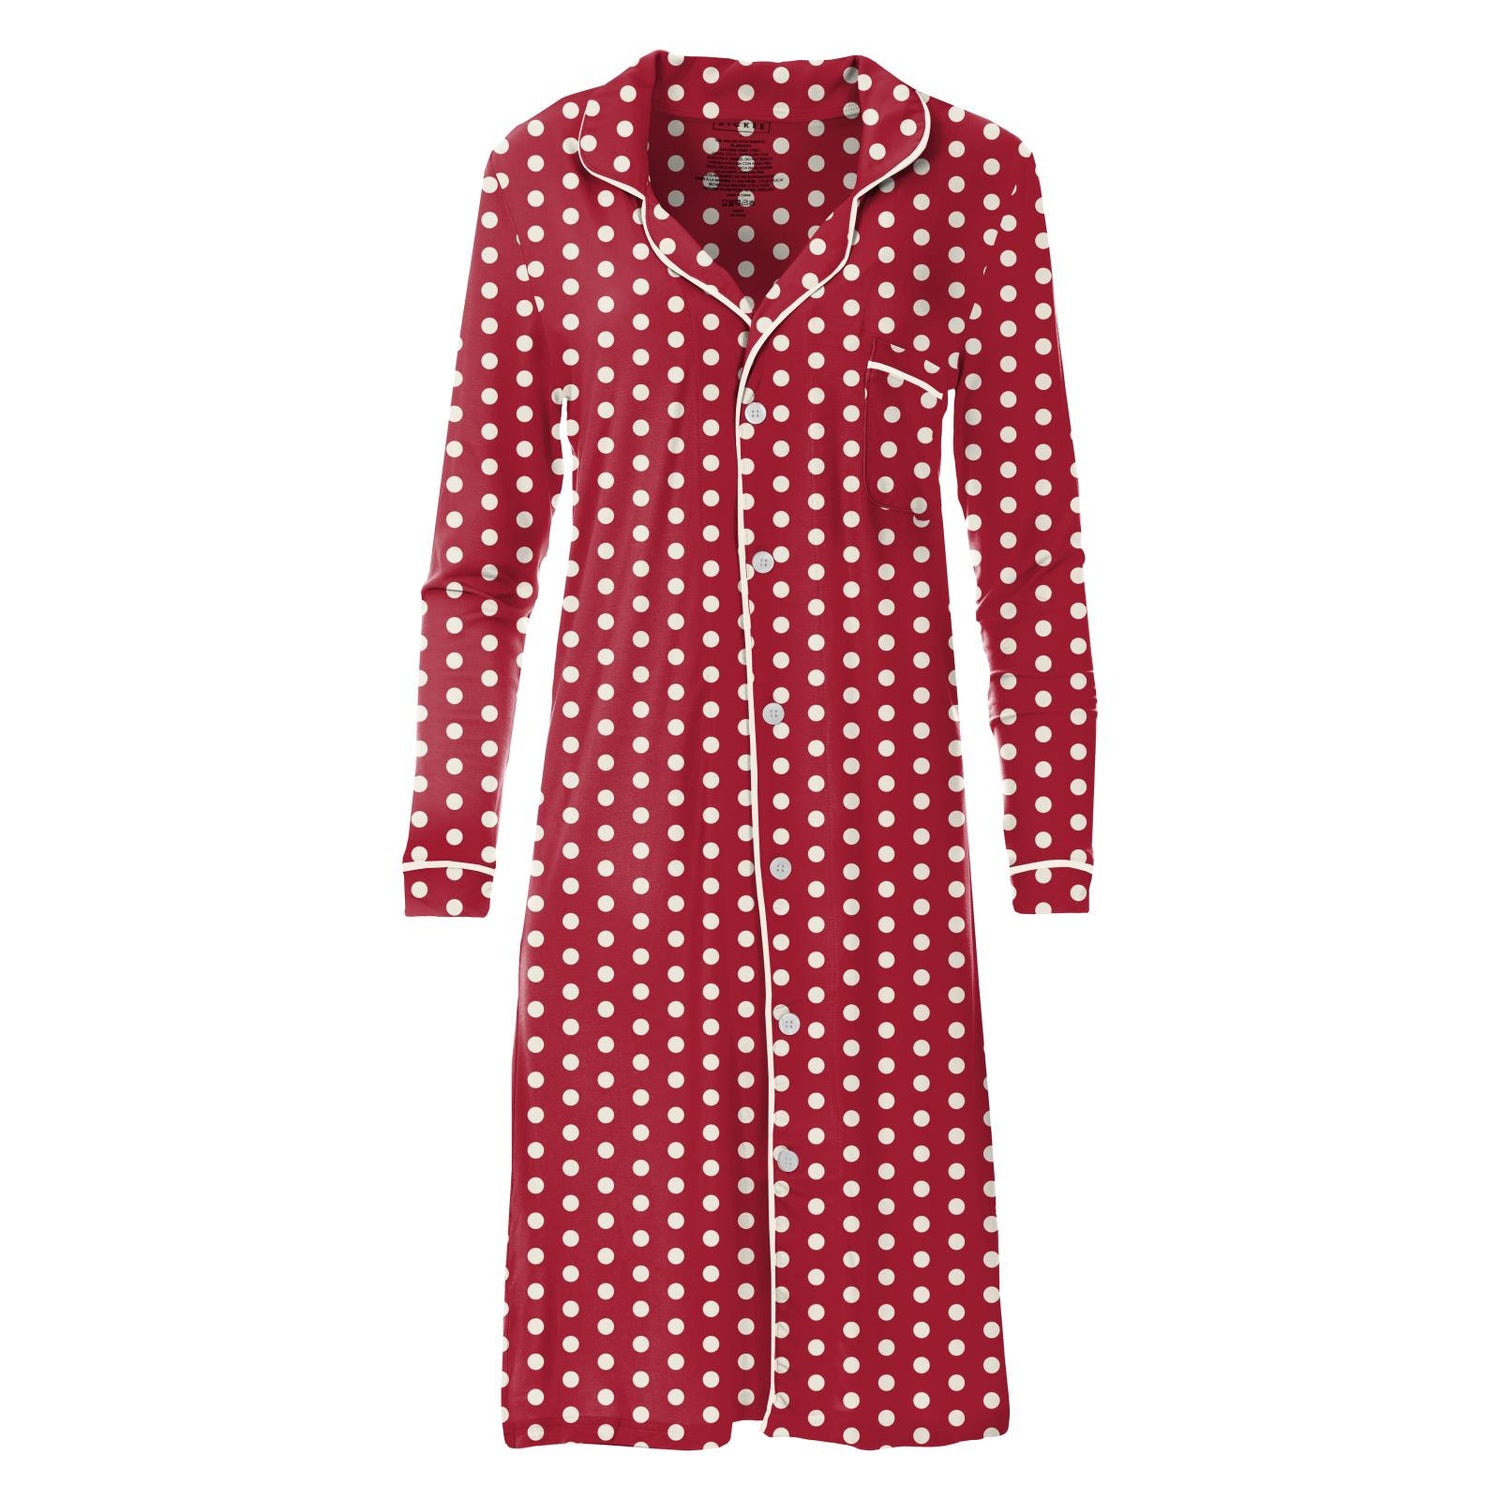 Women's Print Long Sleeve Button Down Nightshirt in Candy Apple Polka Dots